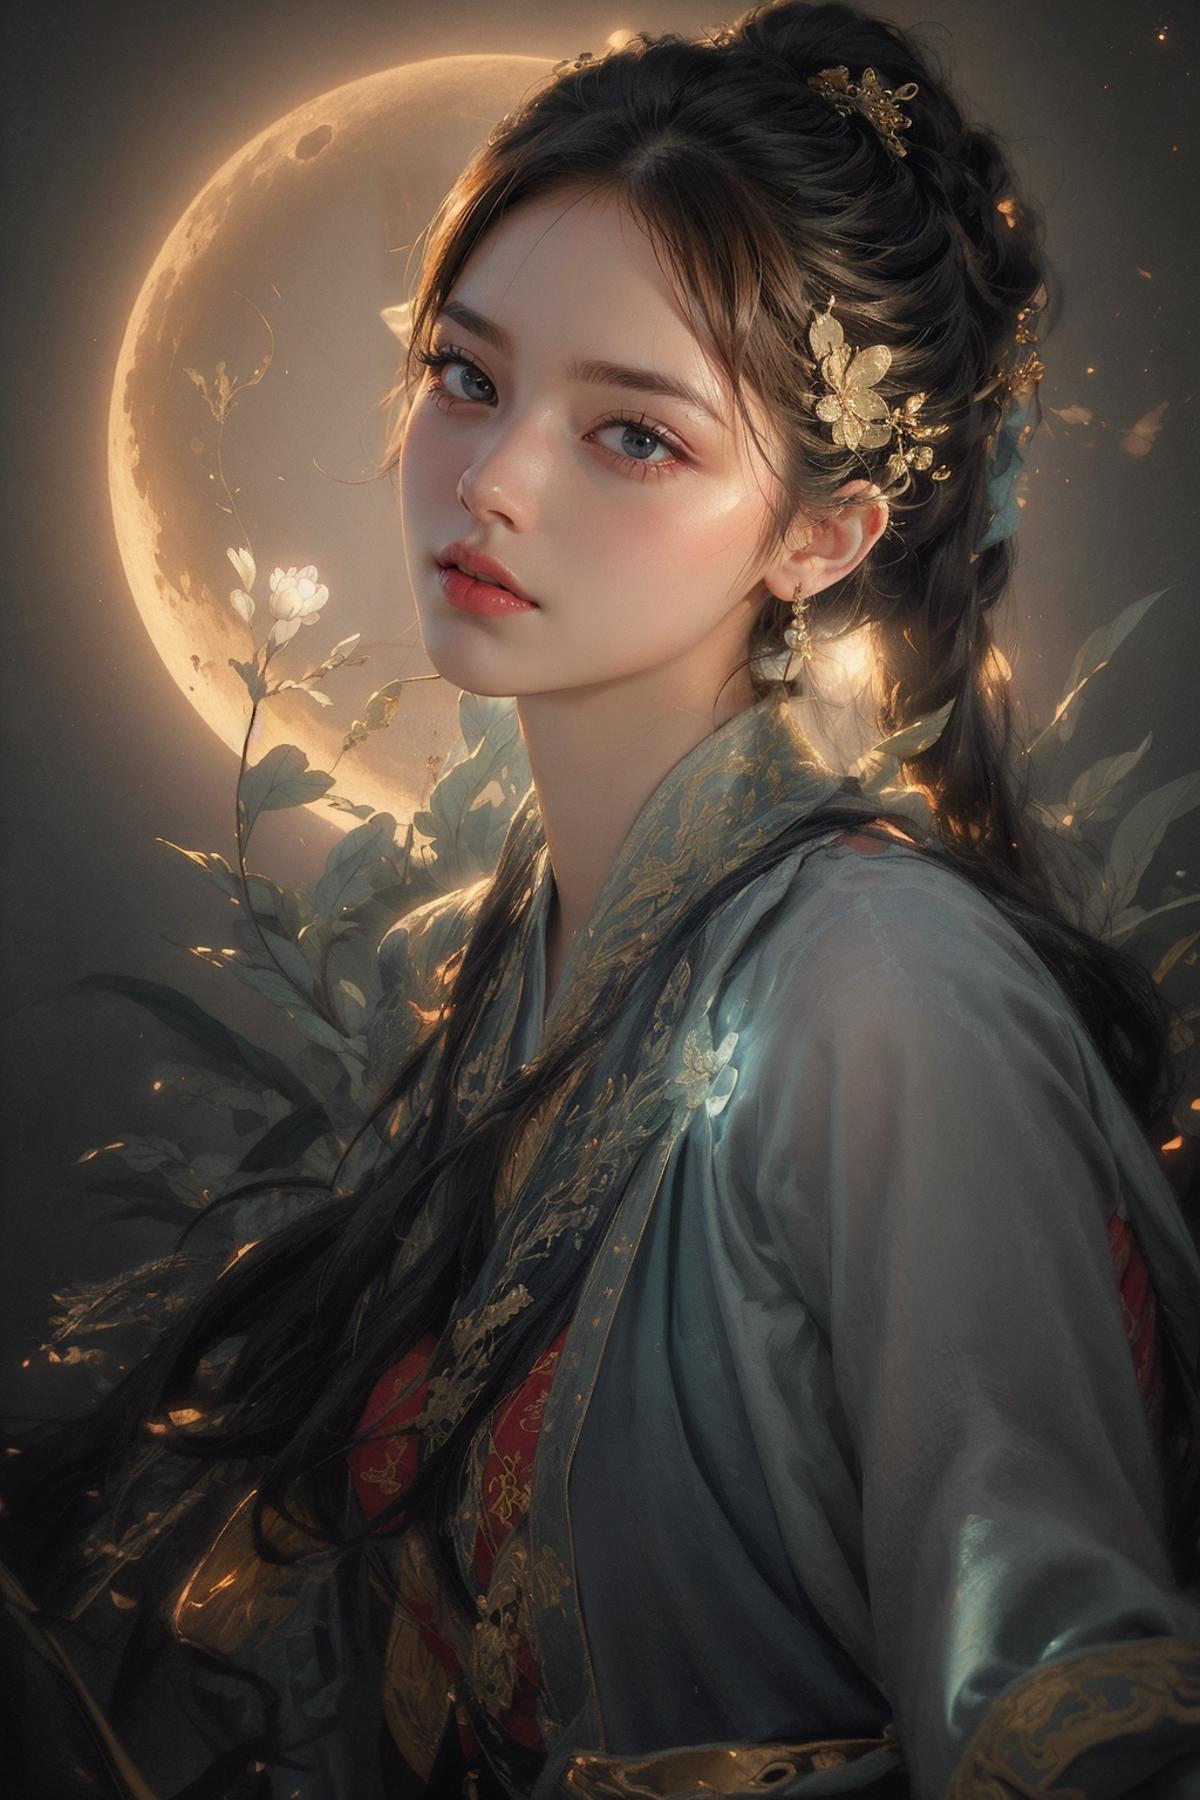 A beautiful woman with long hair and a gold headband is depicted in a painting. The artwork features a flower and a moon in the background, adding to the overall aesthetic. The woman is wearing traditional Asian clothing, which complements the scene and highlights the cultural aspect of the painting. The image is a stunning representation of elegance and artistic expression.